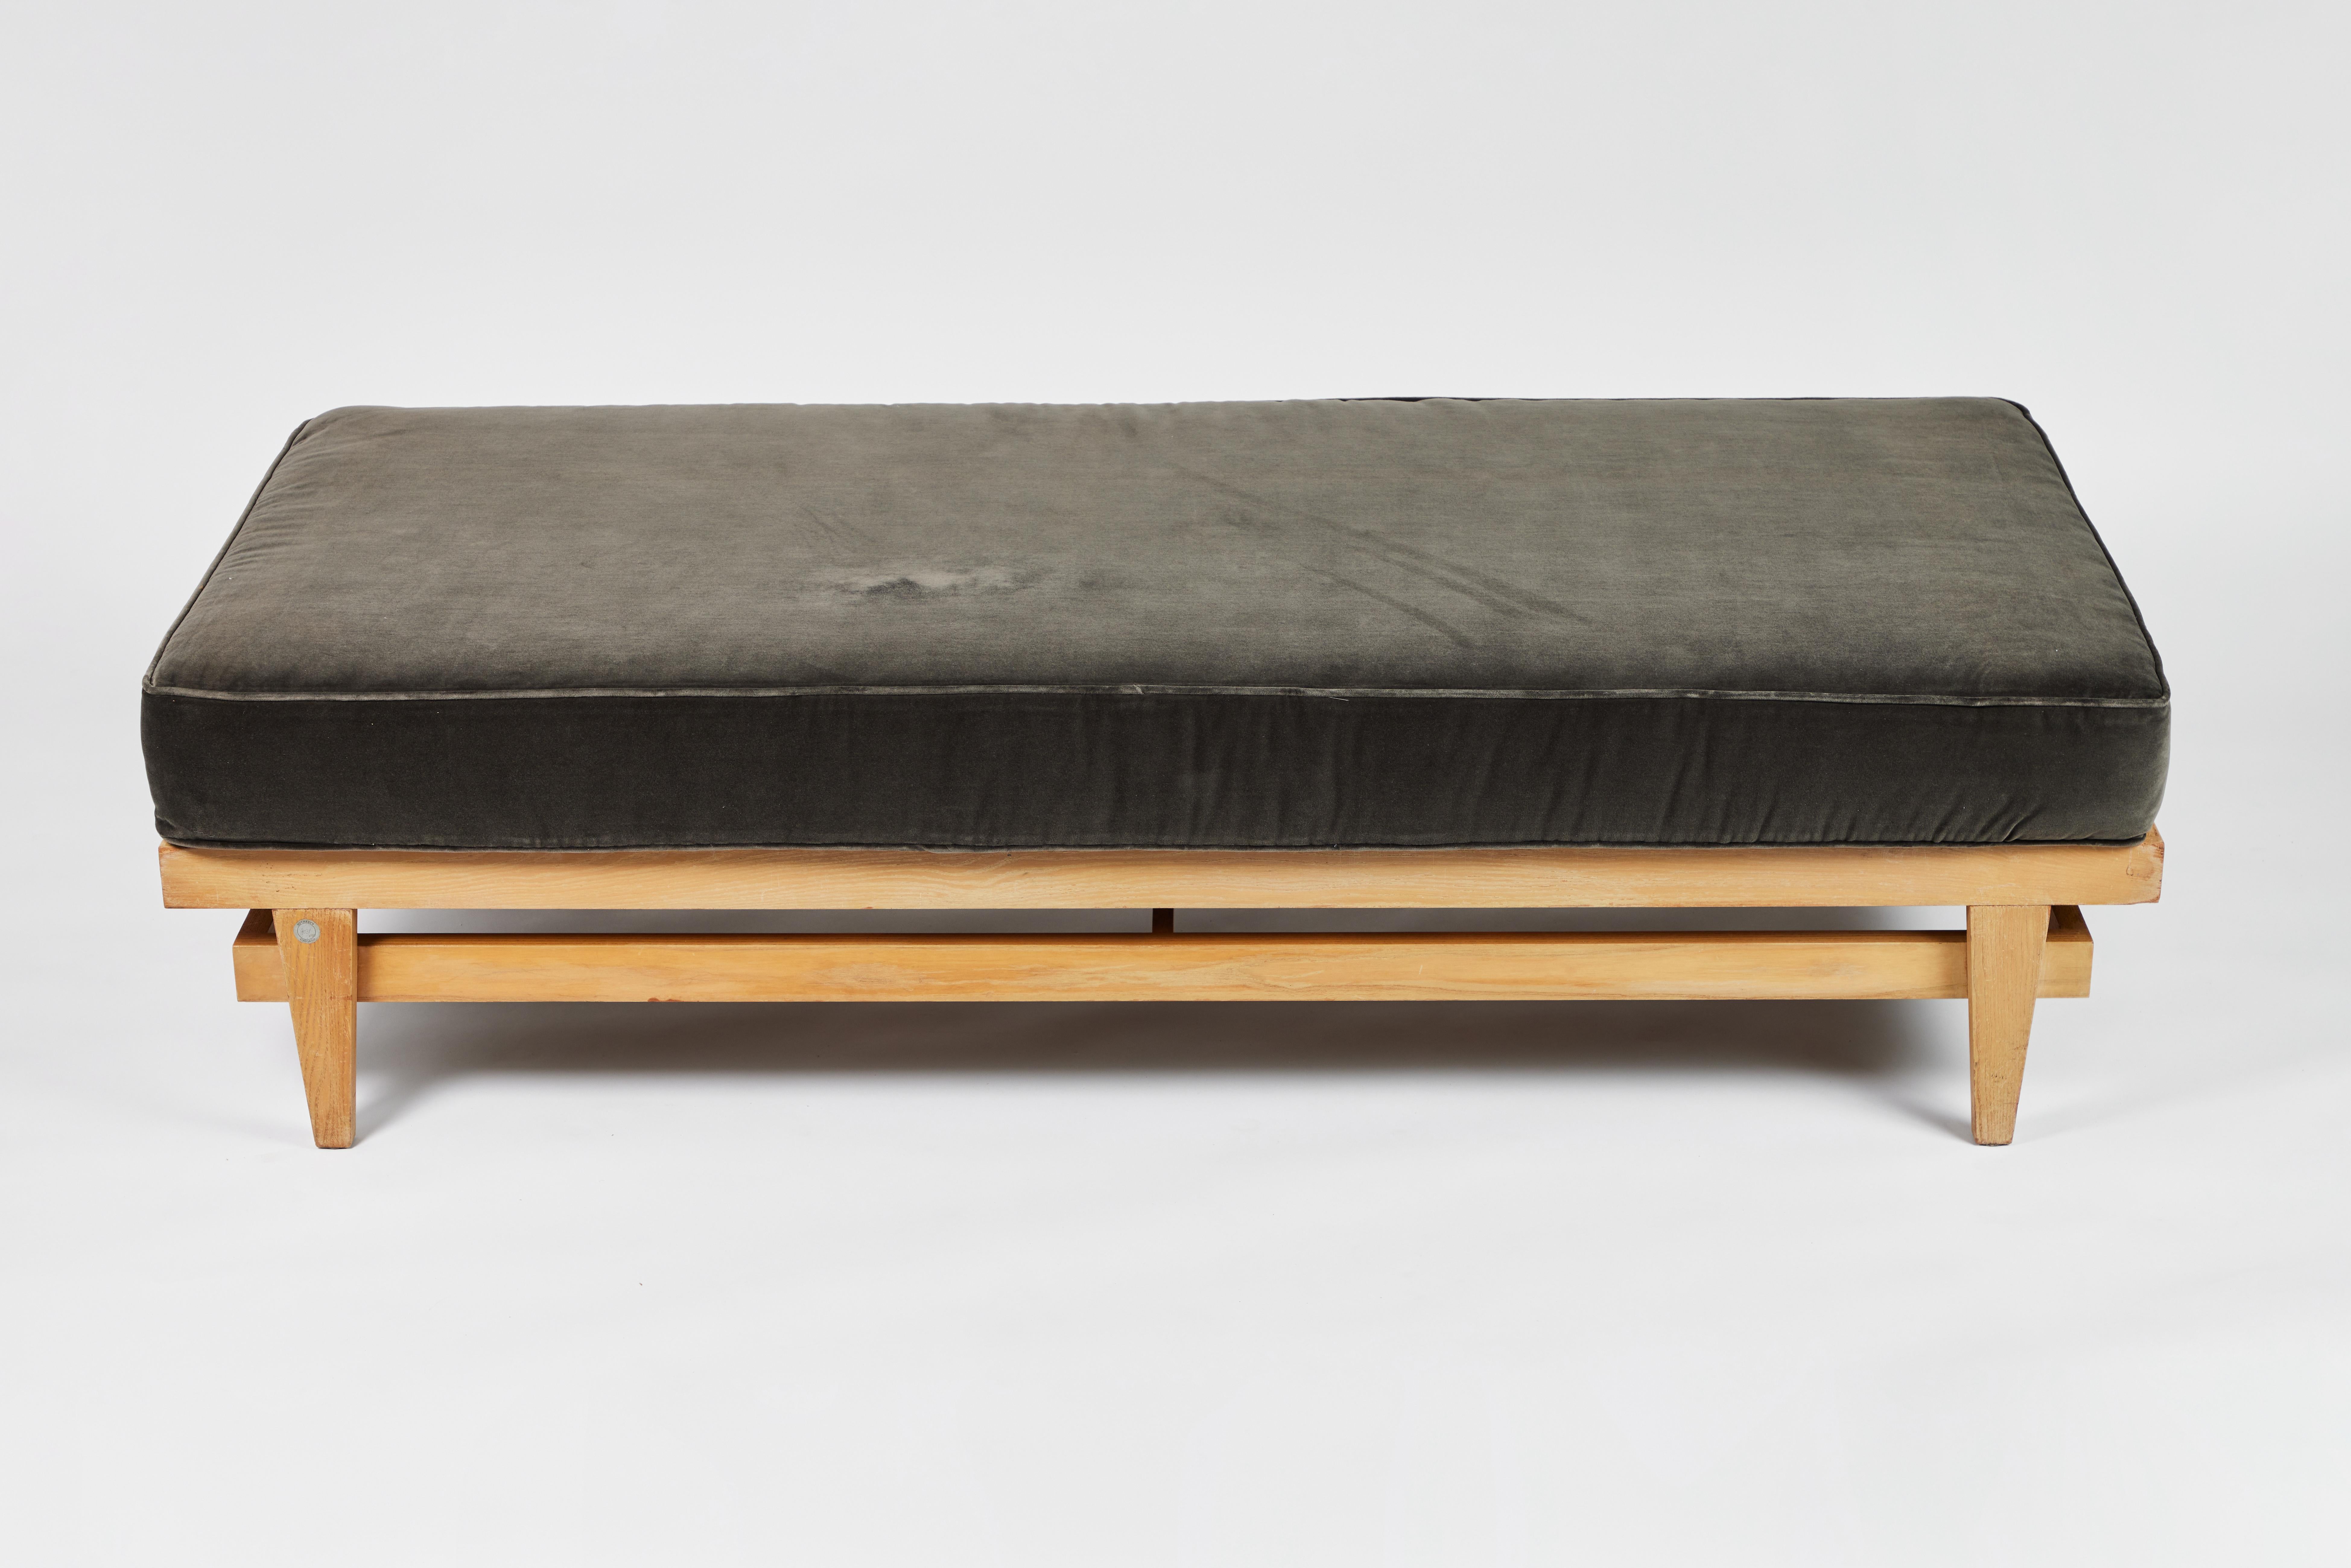 1960s bleached oak daybed by Chicago architect Bertrand Goldberg with new cushion in Kravet performance velvet. 

Cushion height: 7